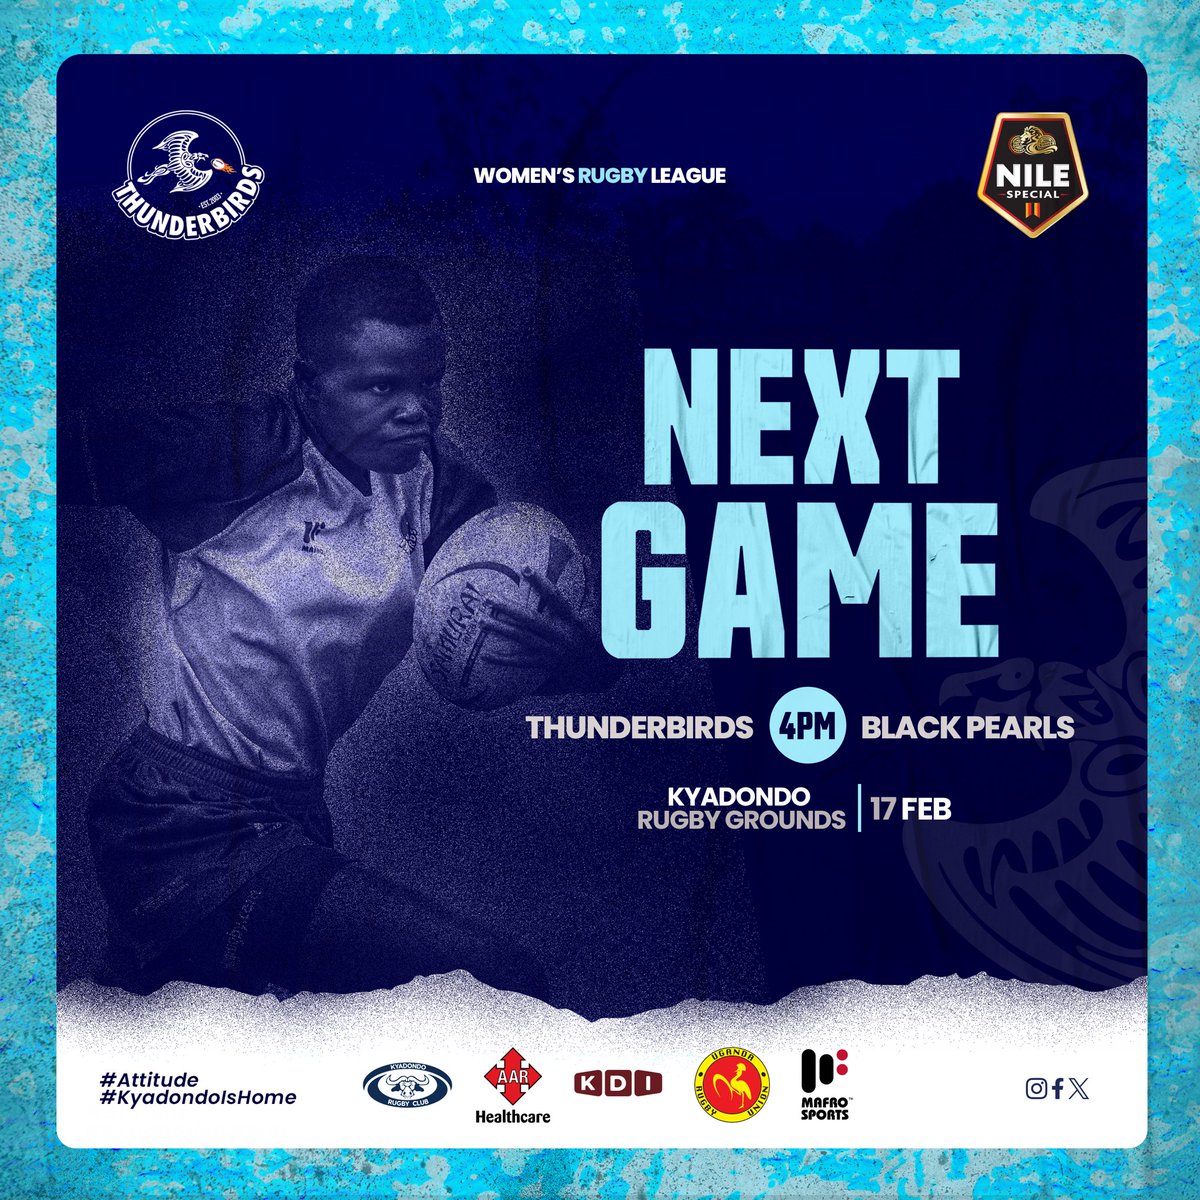 WE ARE HOME! 💪🏿 This Saturday, we take on @BlackPearlsRFC in a our second fixture of the #NileSpecialRugby League at @KyadondoClub - 4PM. Come in numbers to support and watch entertaining women’s rugby. #Attitude #KyadondoIsHome